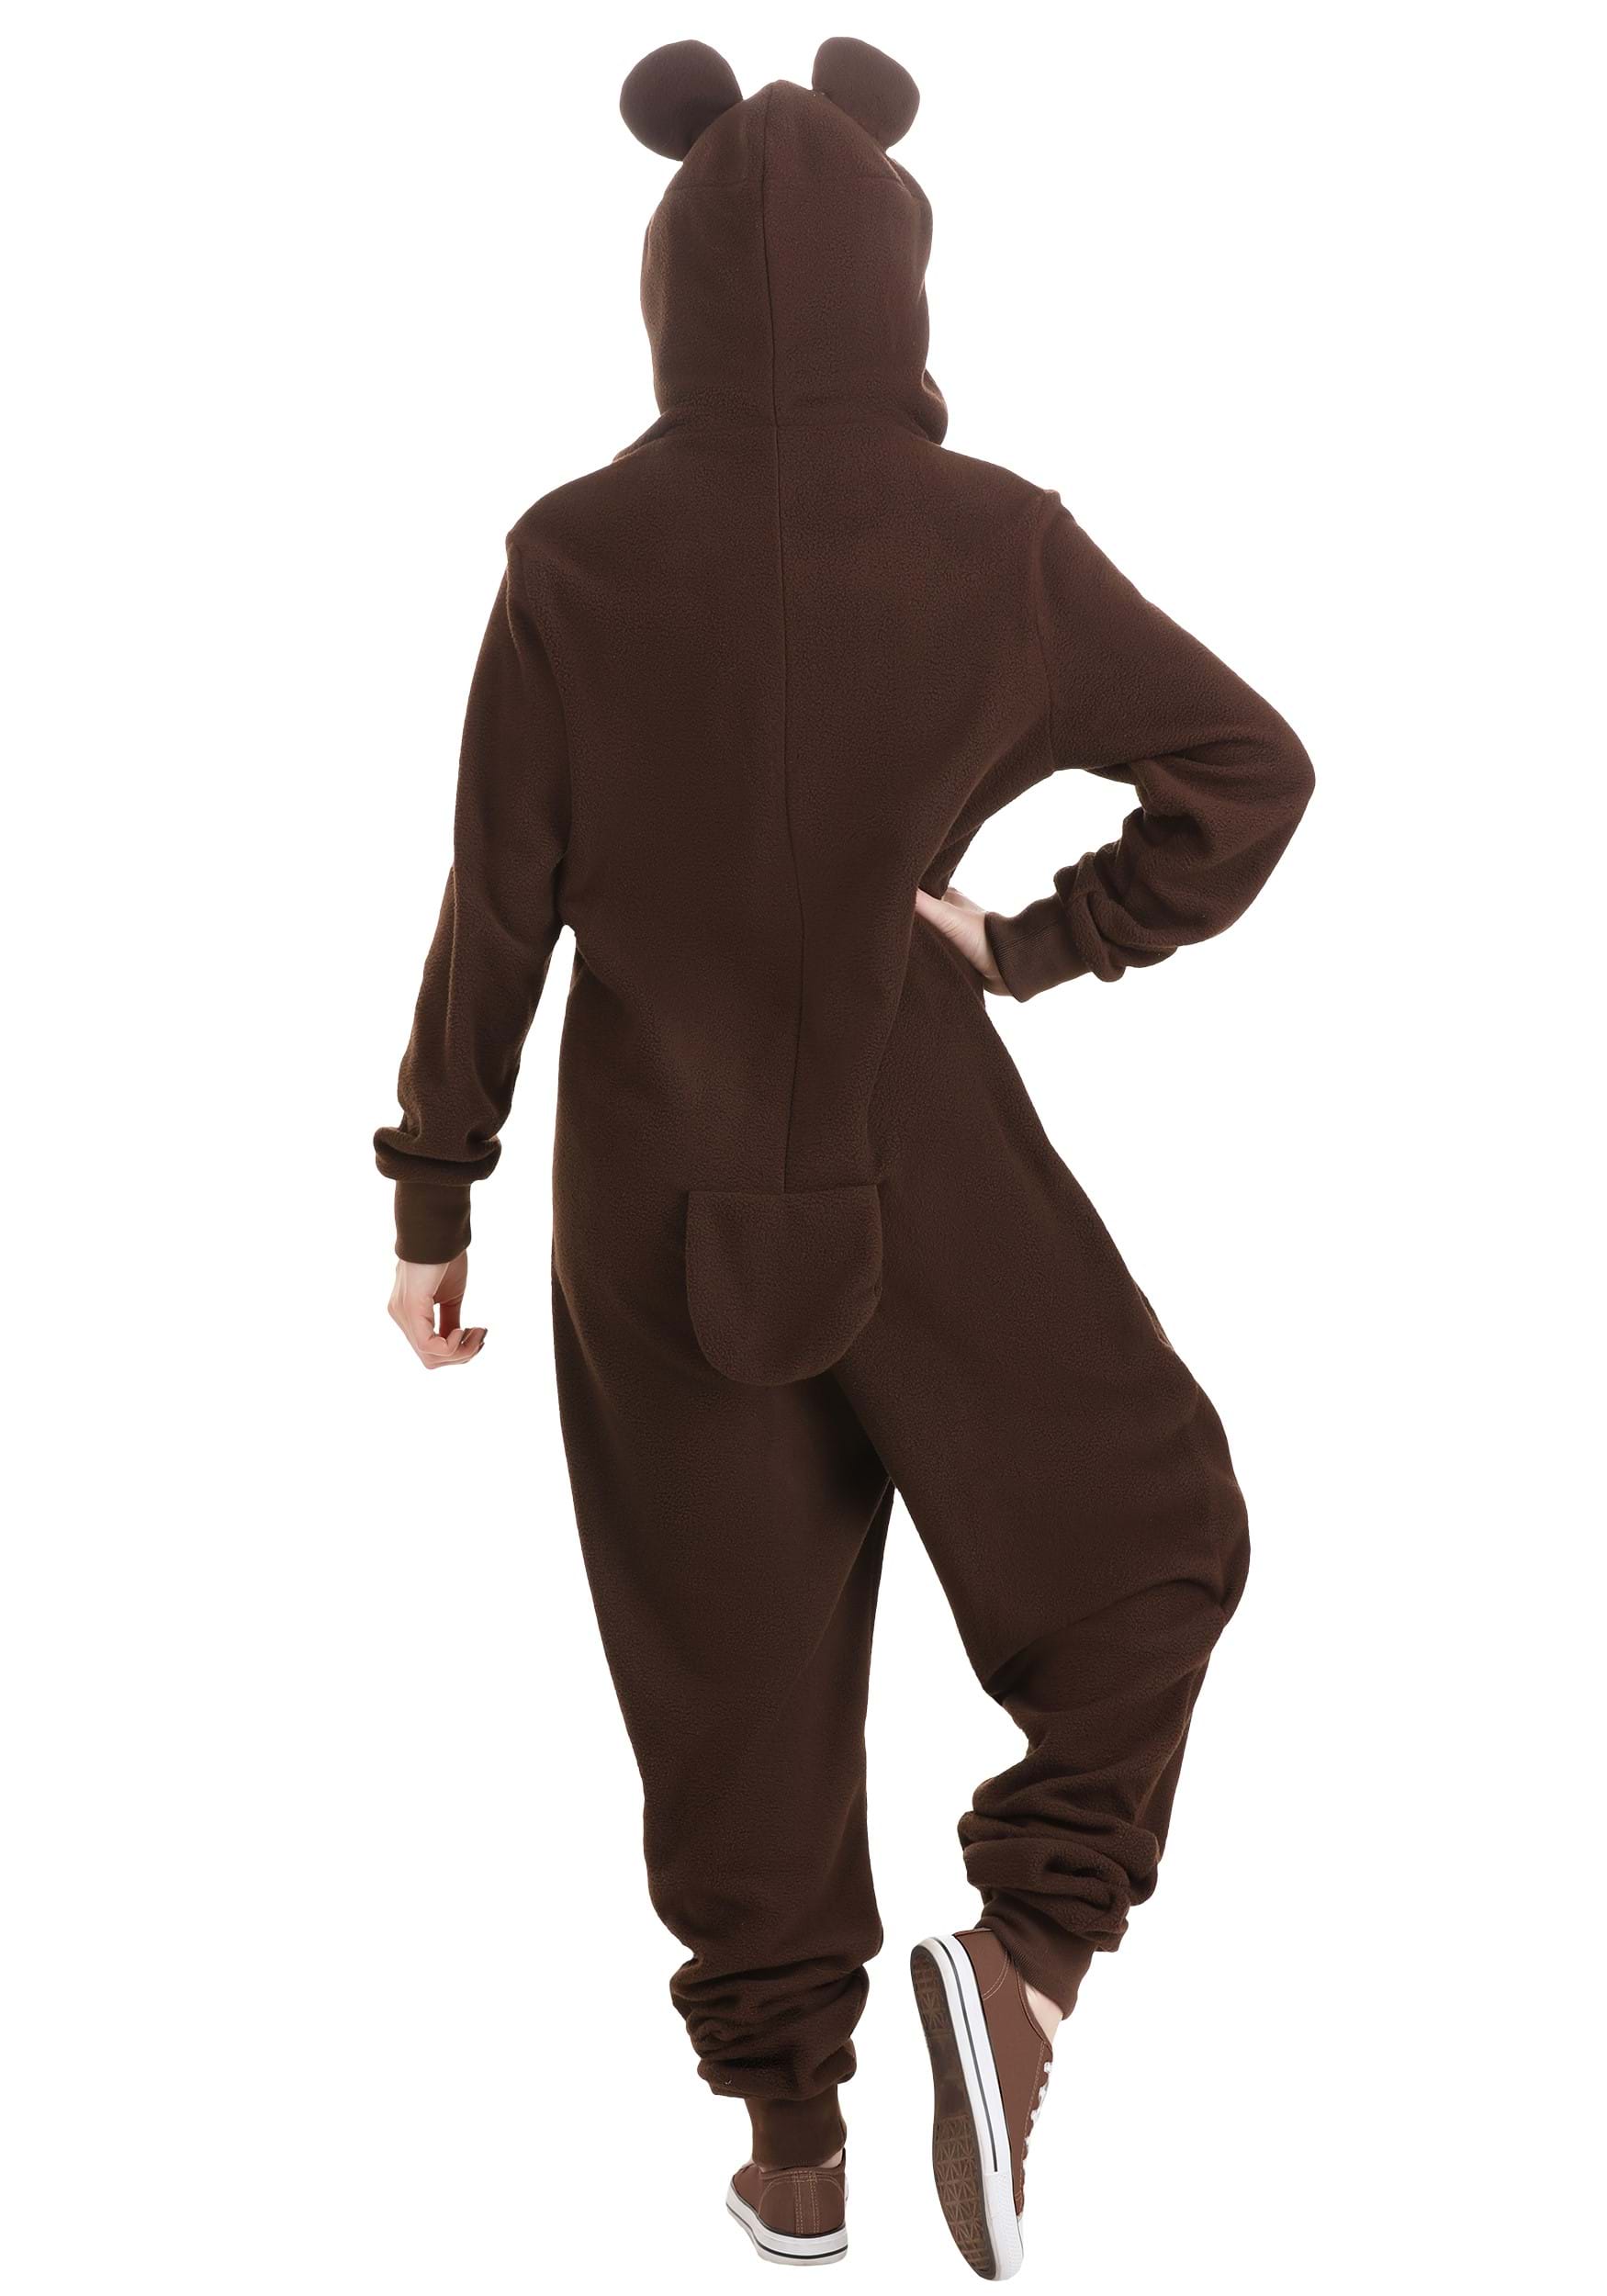 Bear Onesie Costume For Adults , Adult Animal Costumes